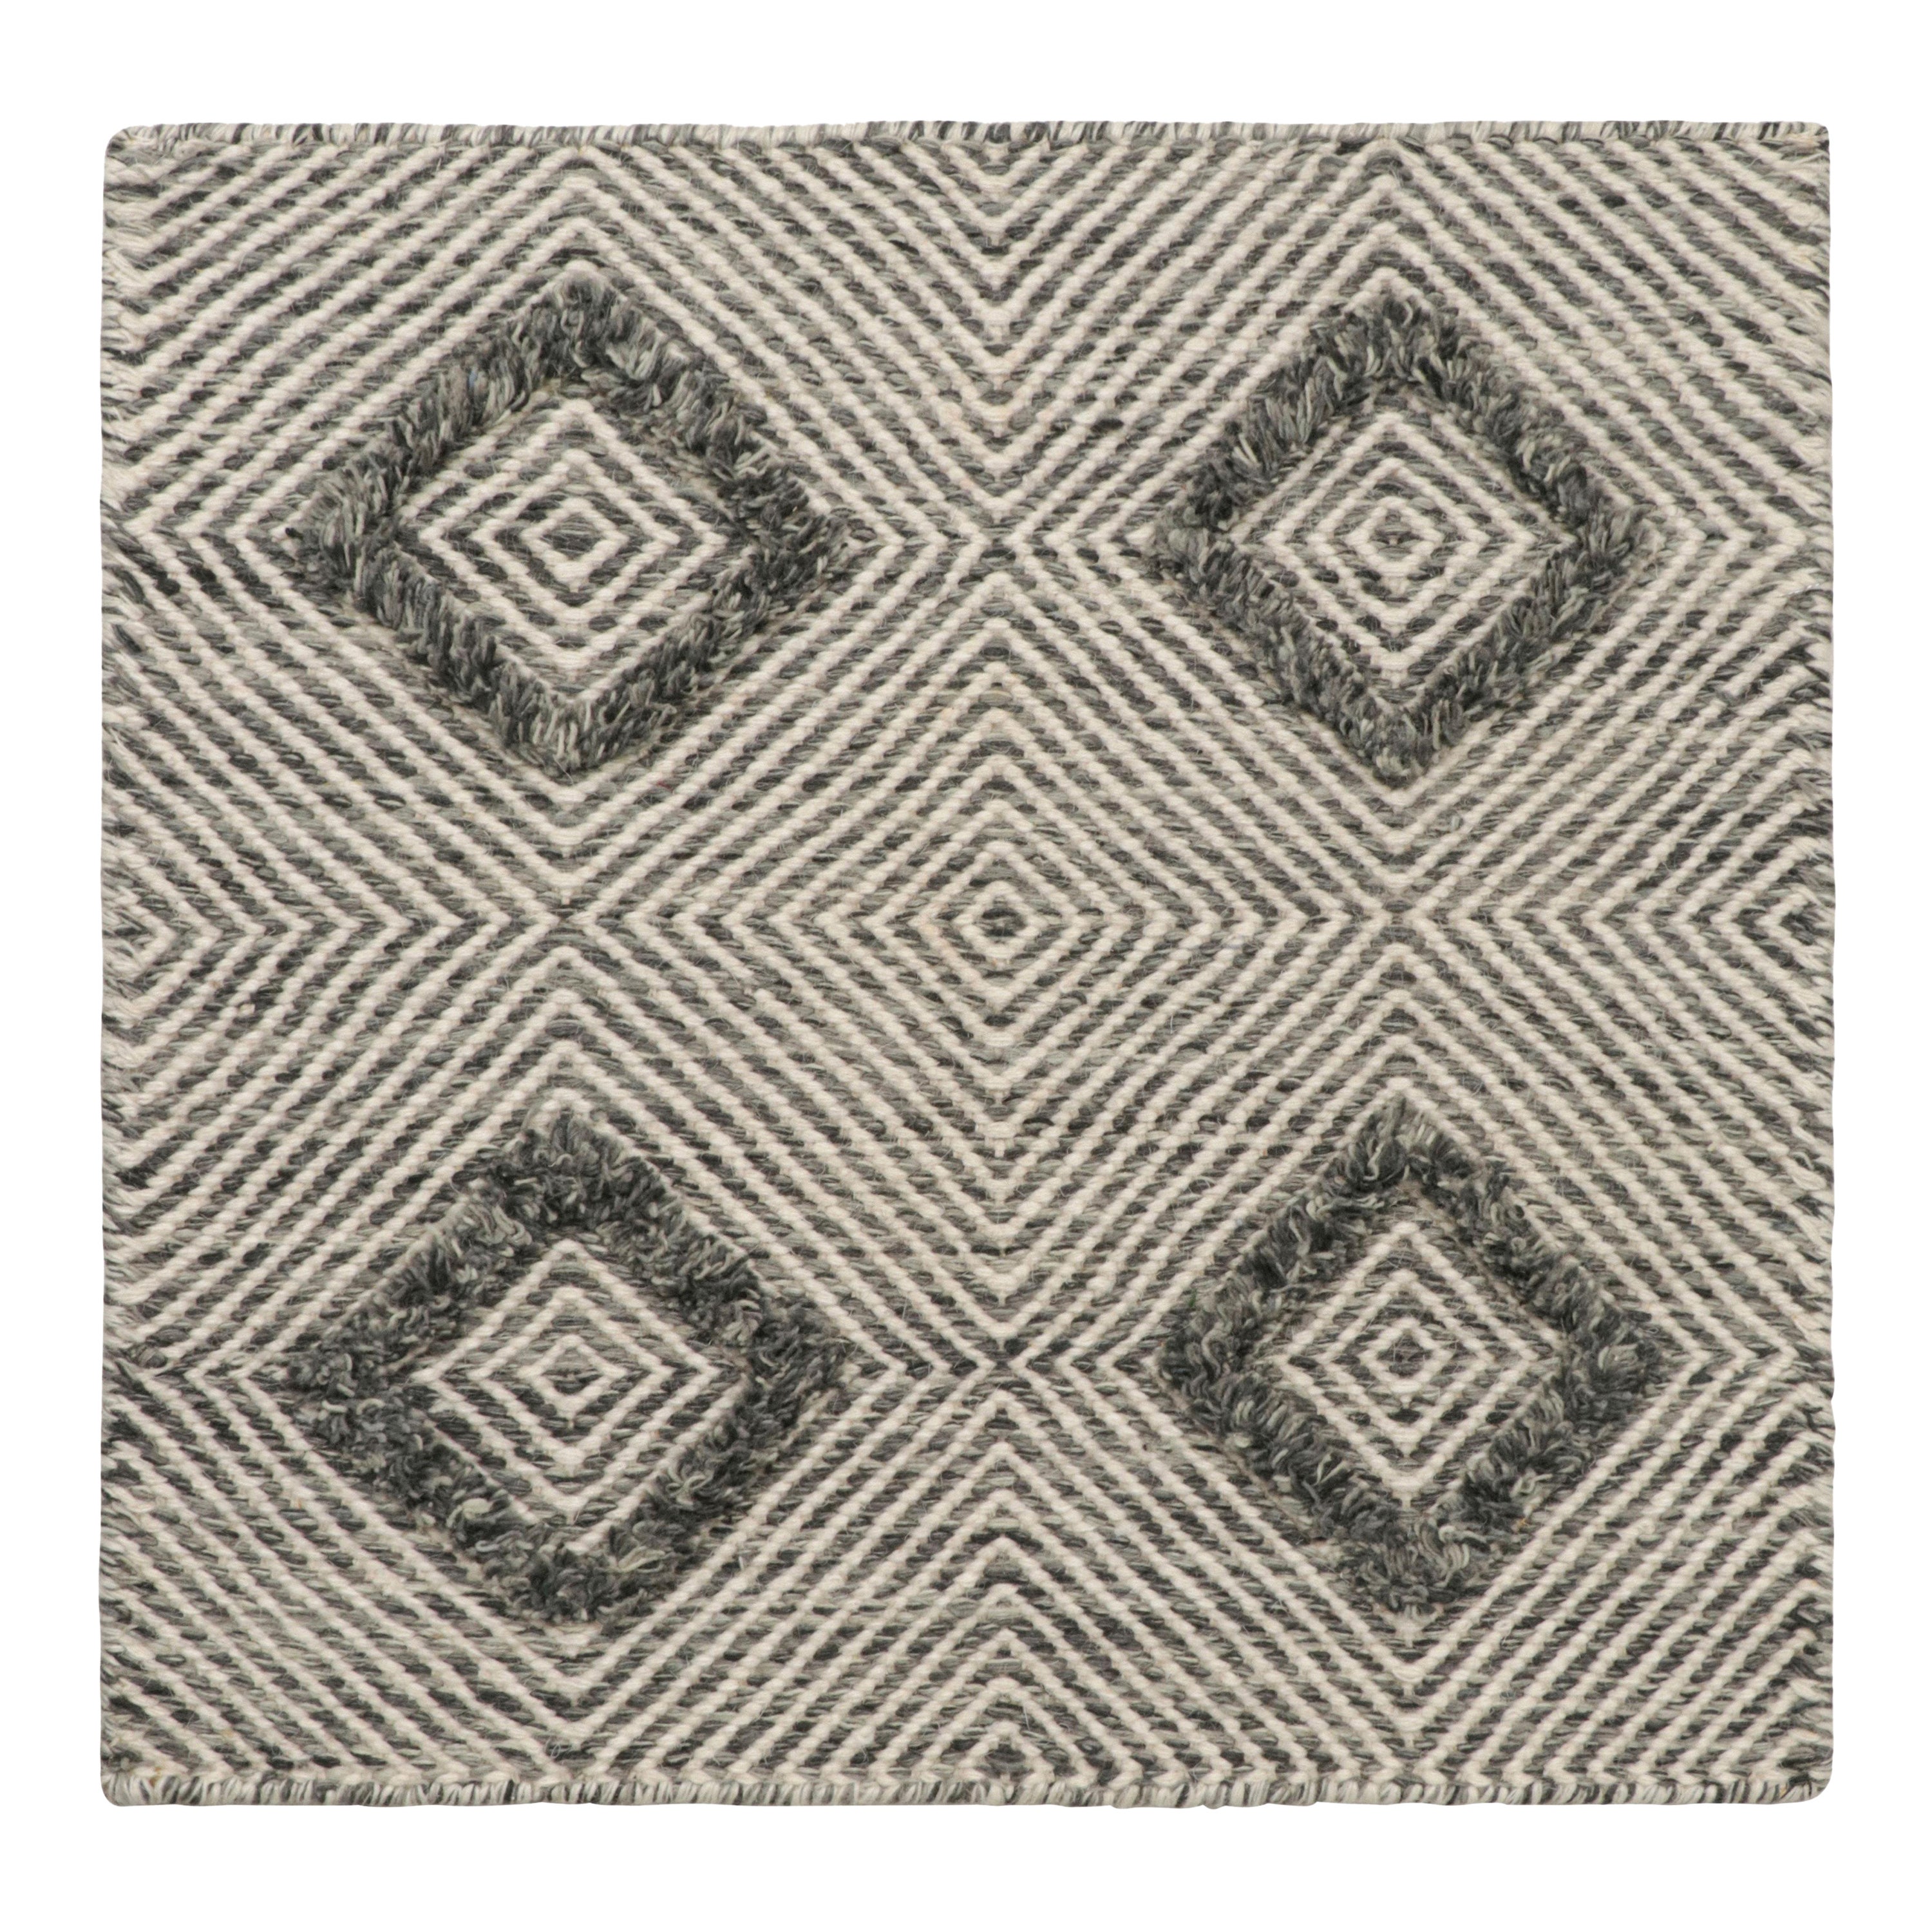 Rug & Kilim’s Contemporary Scatter Rug with White and Gray Geometric Patterns